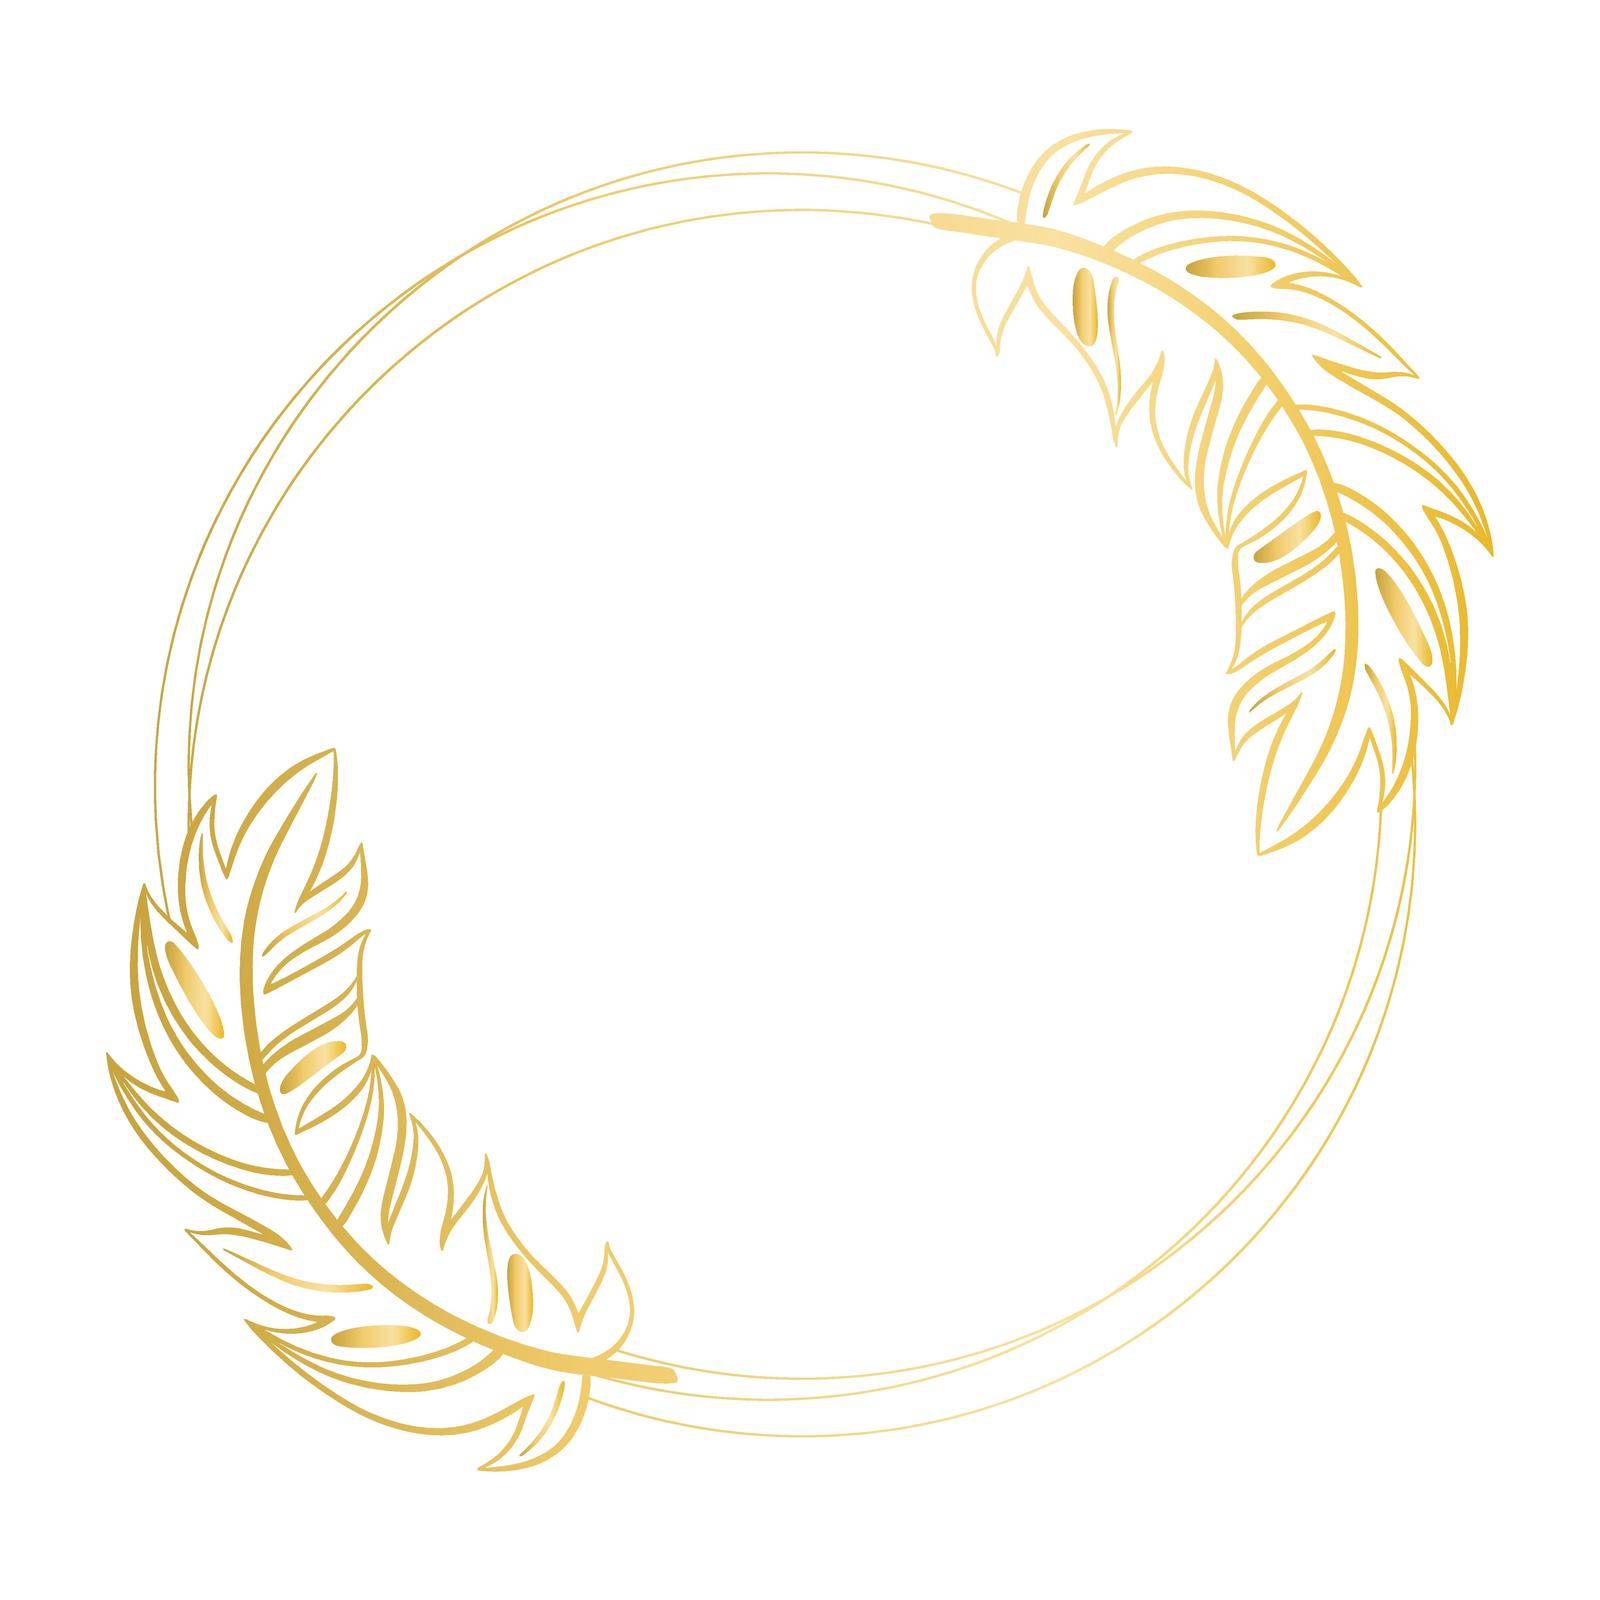 Graceful golden round frame with feathers. Gold wreath with gold decorated feathers. Rim for invitation, postcard or congratulations. Circular template vector illustration